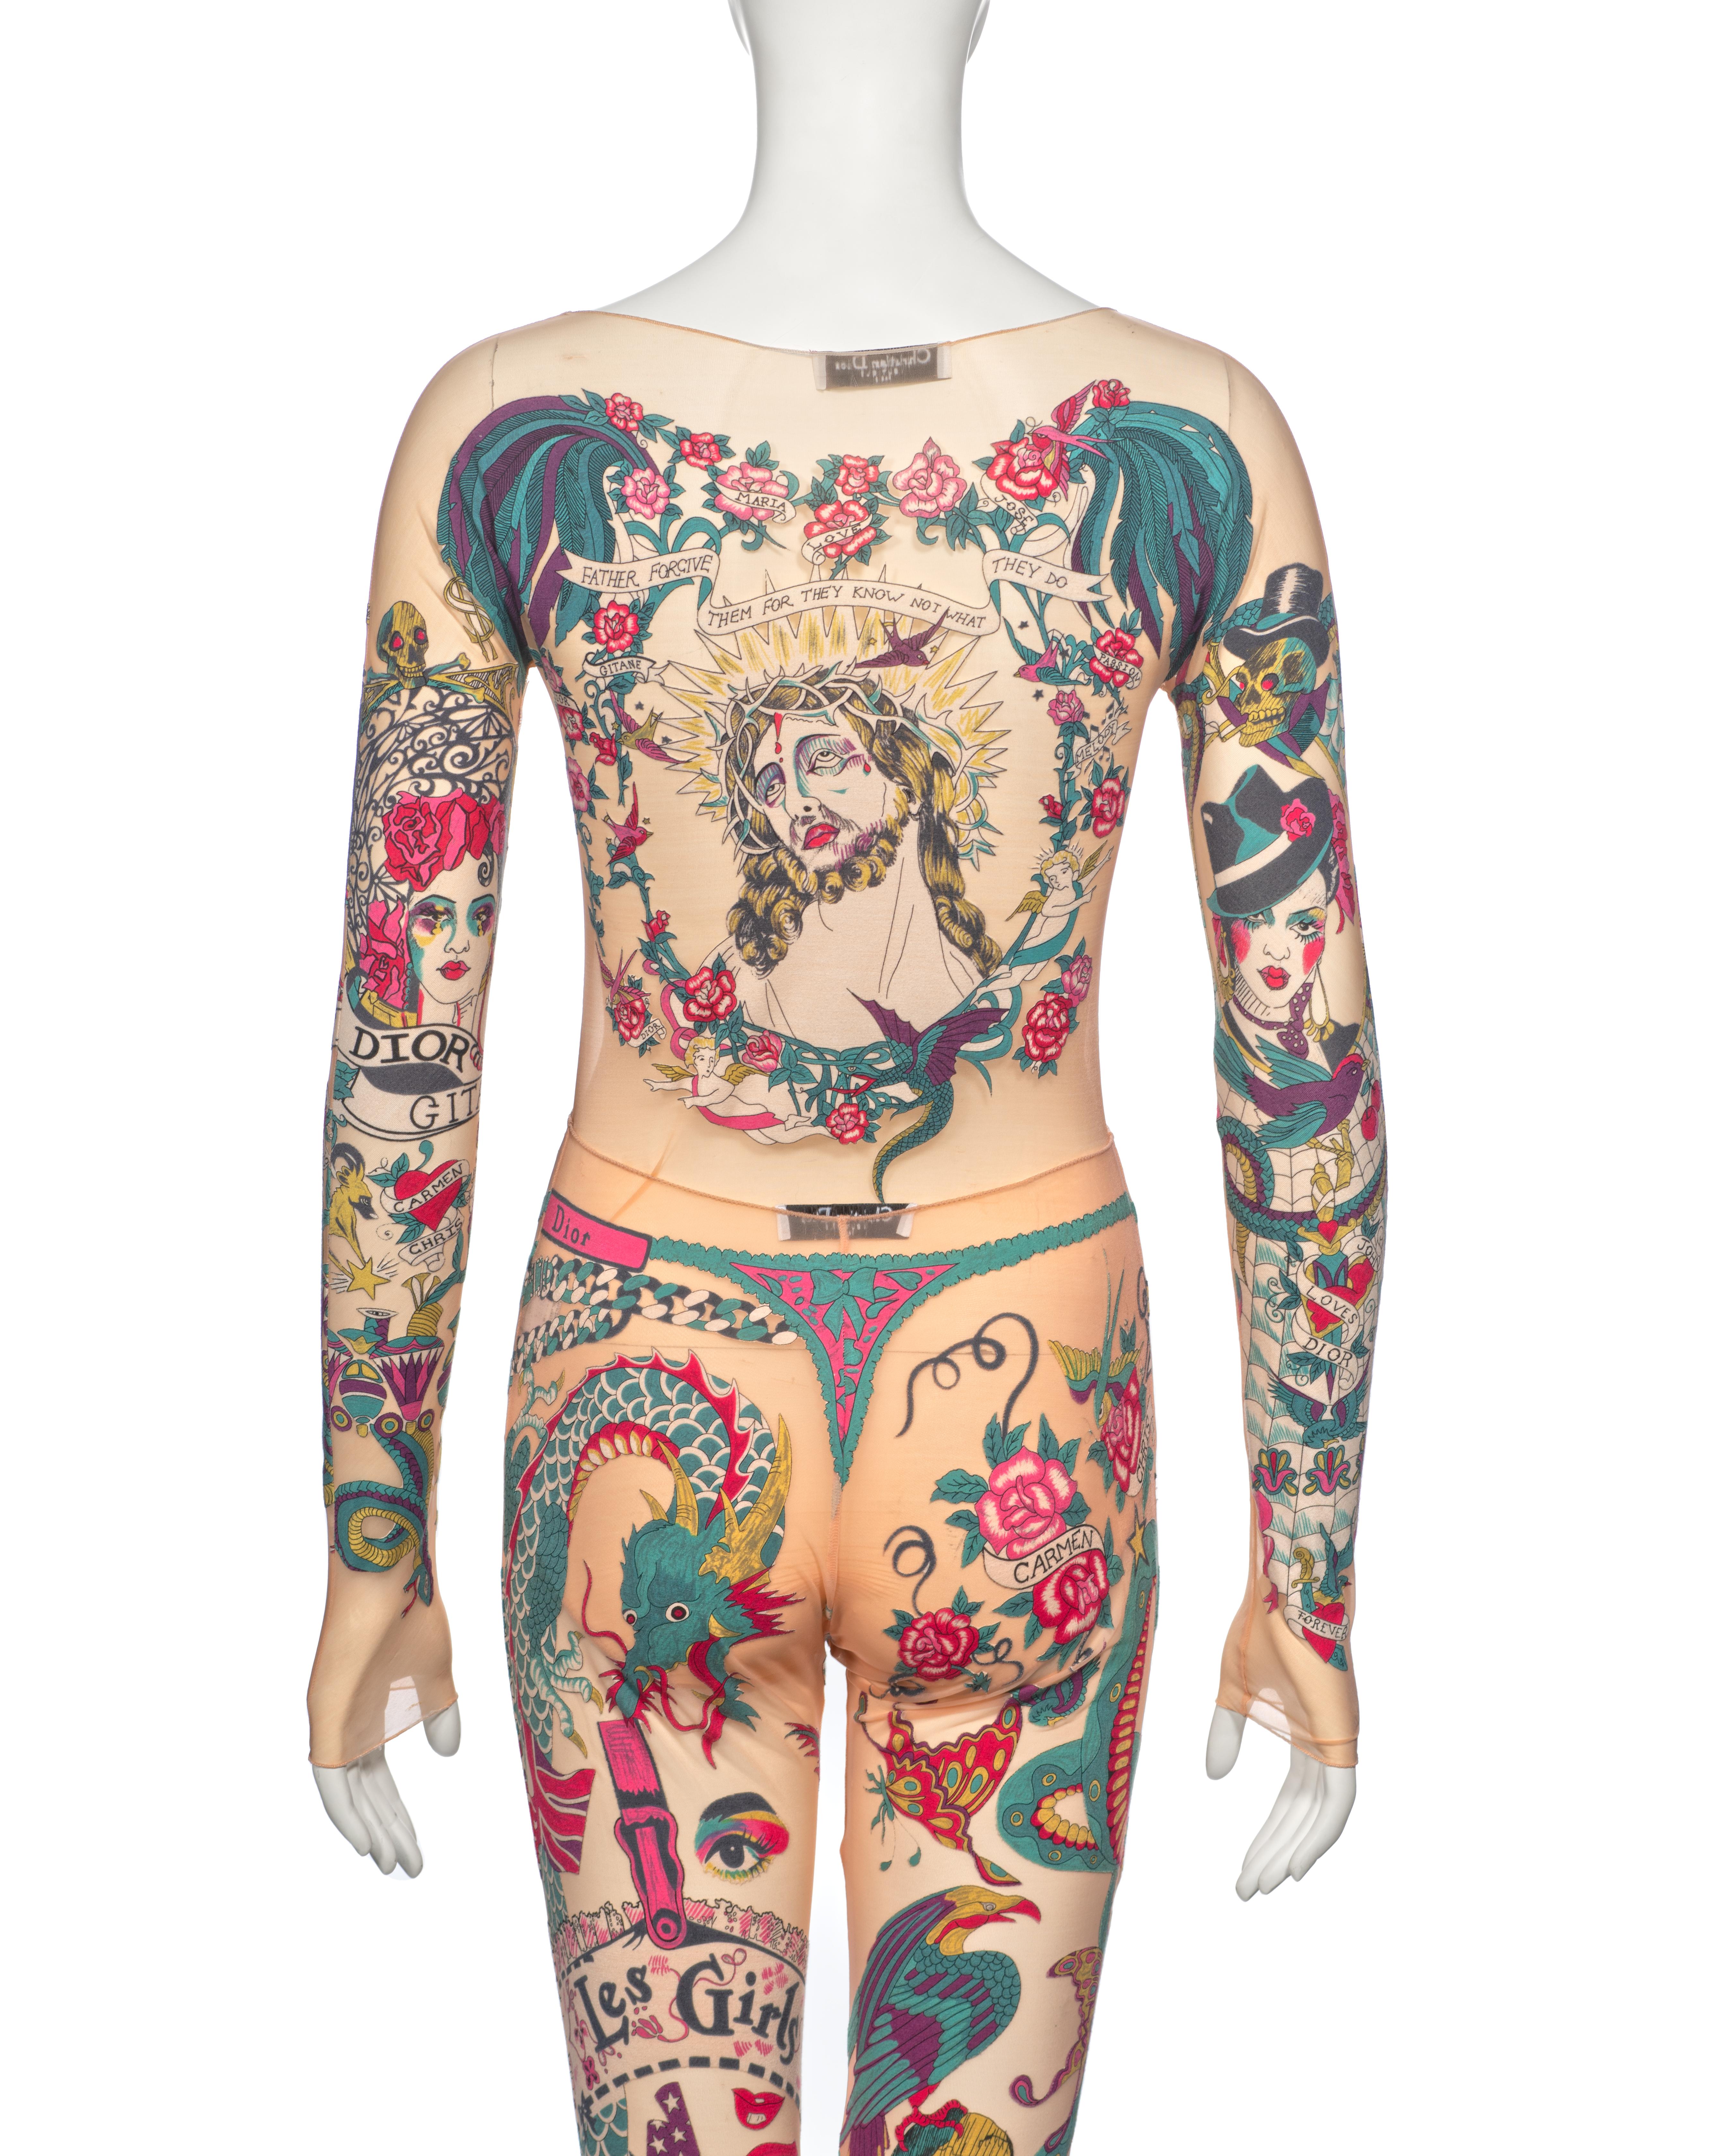 Christian Dior by John Galliano Tattoo Print Body, Leggings and Skirt, ss 2004 For Sale 16